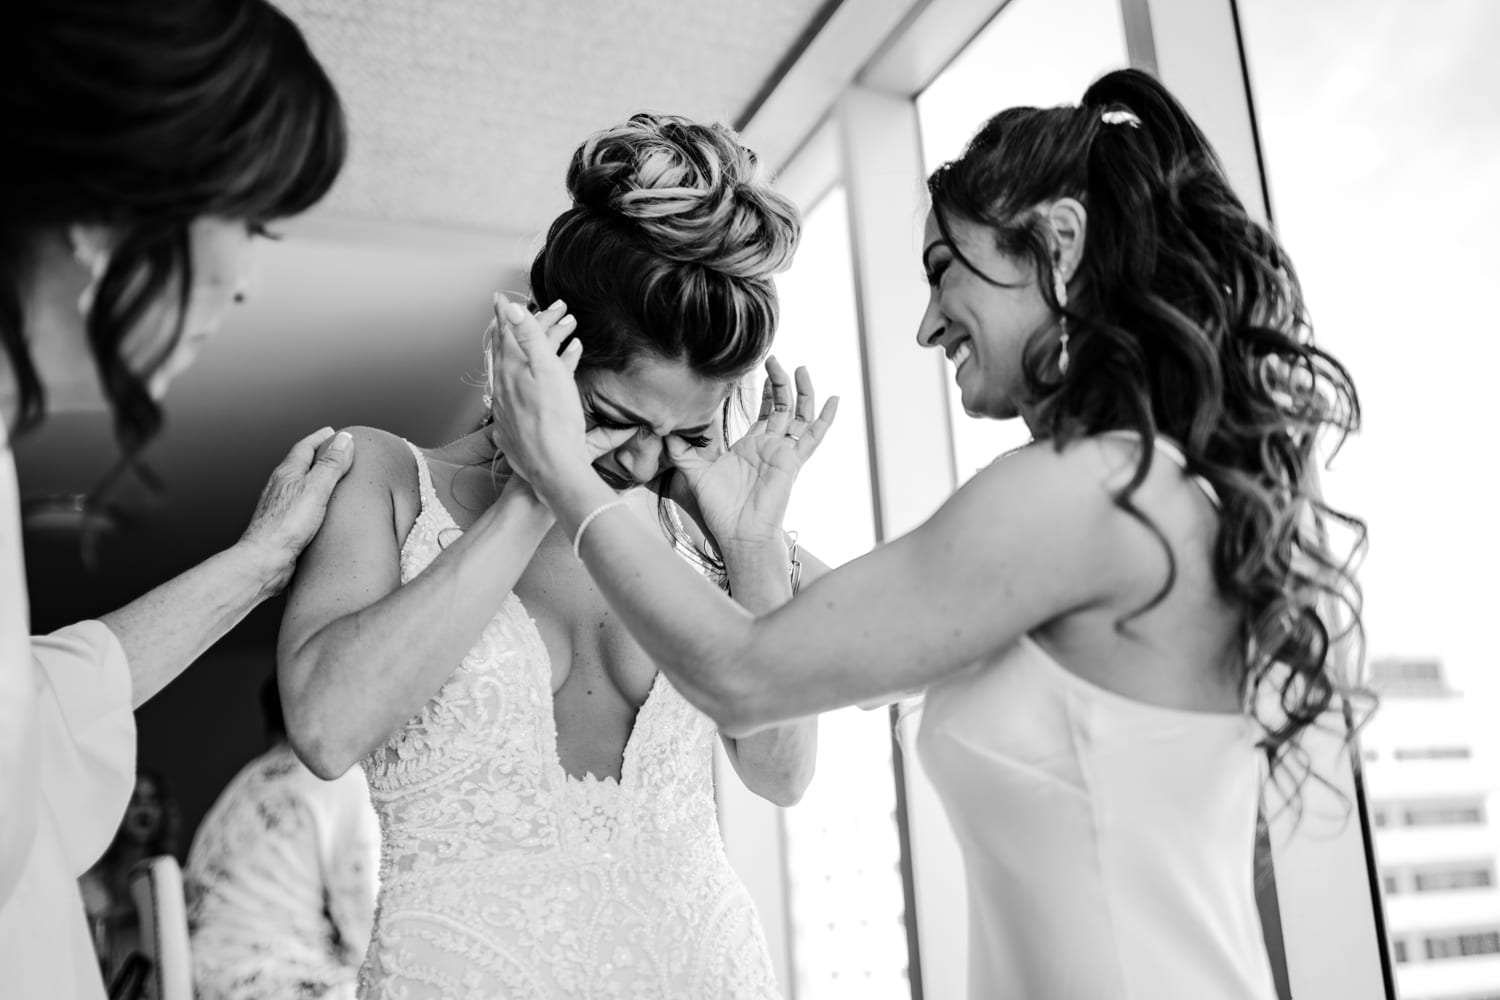 A bride and her bridesmaids are getting ready for their wedding at Eden Roc Resort in Miami.